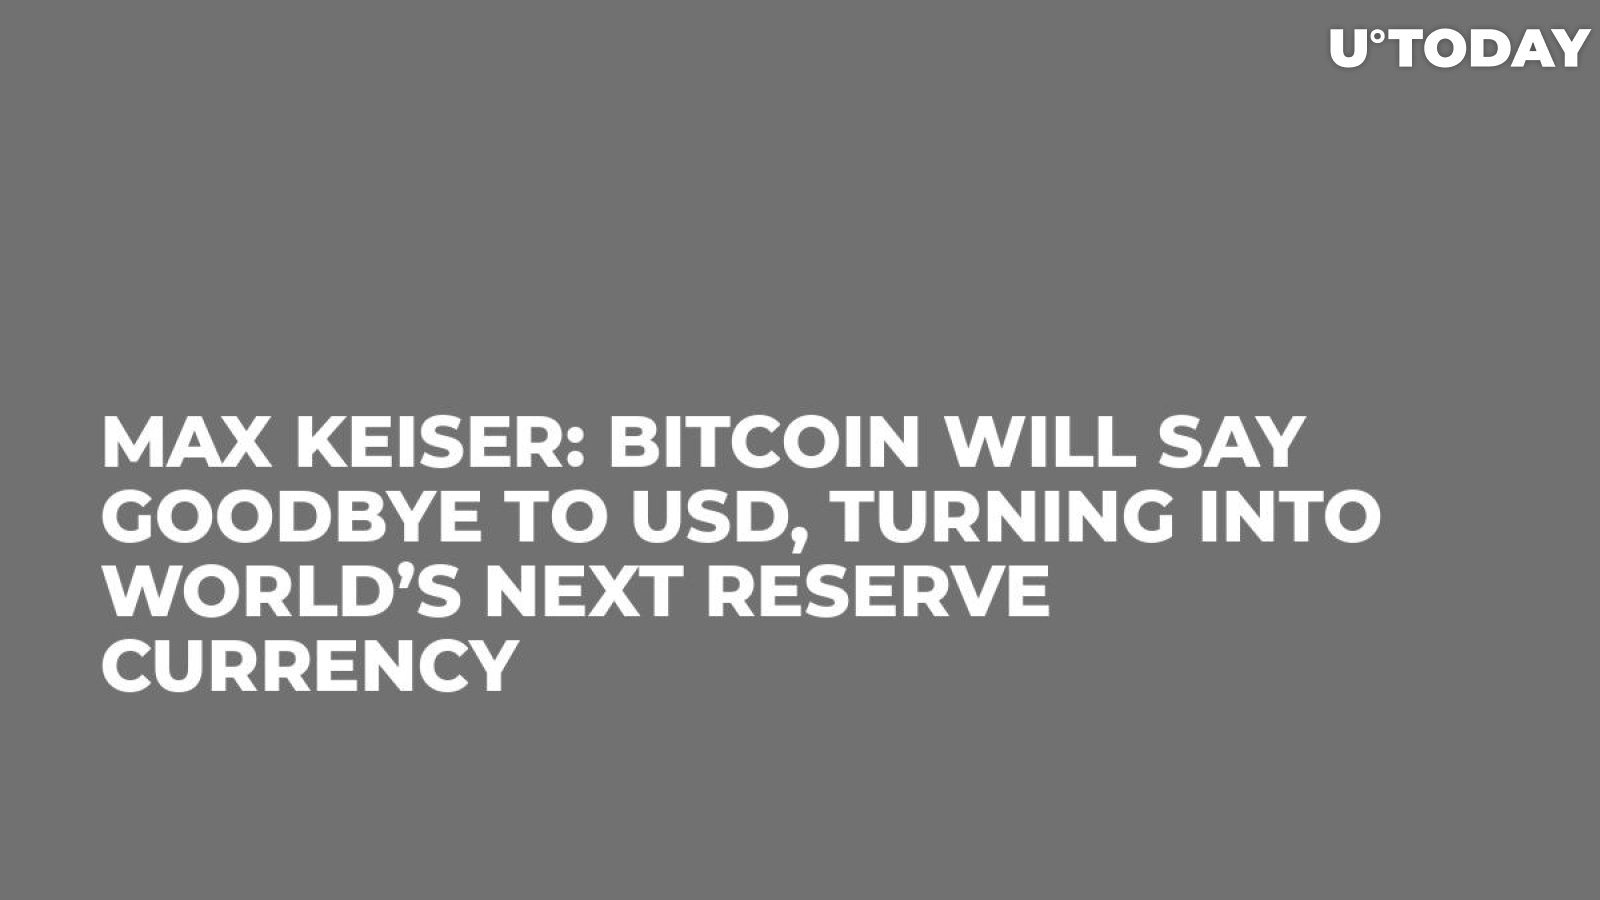 Max Keiser: Bitcoin Will Say Goodbye to USD, Turning into World’s Next Reserve Currency